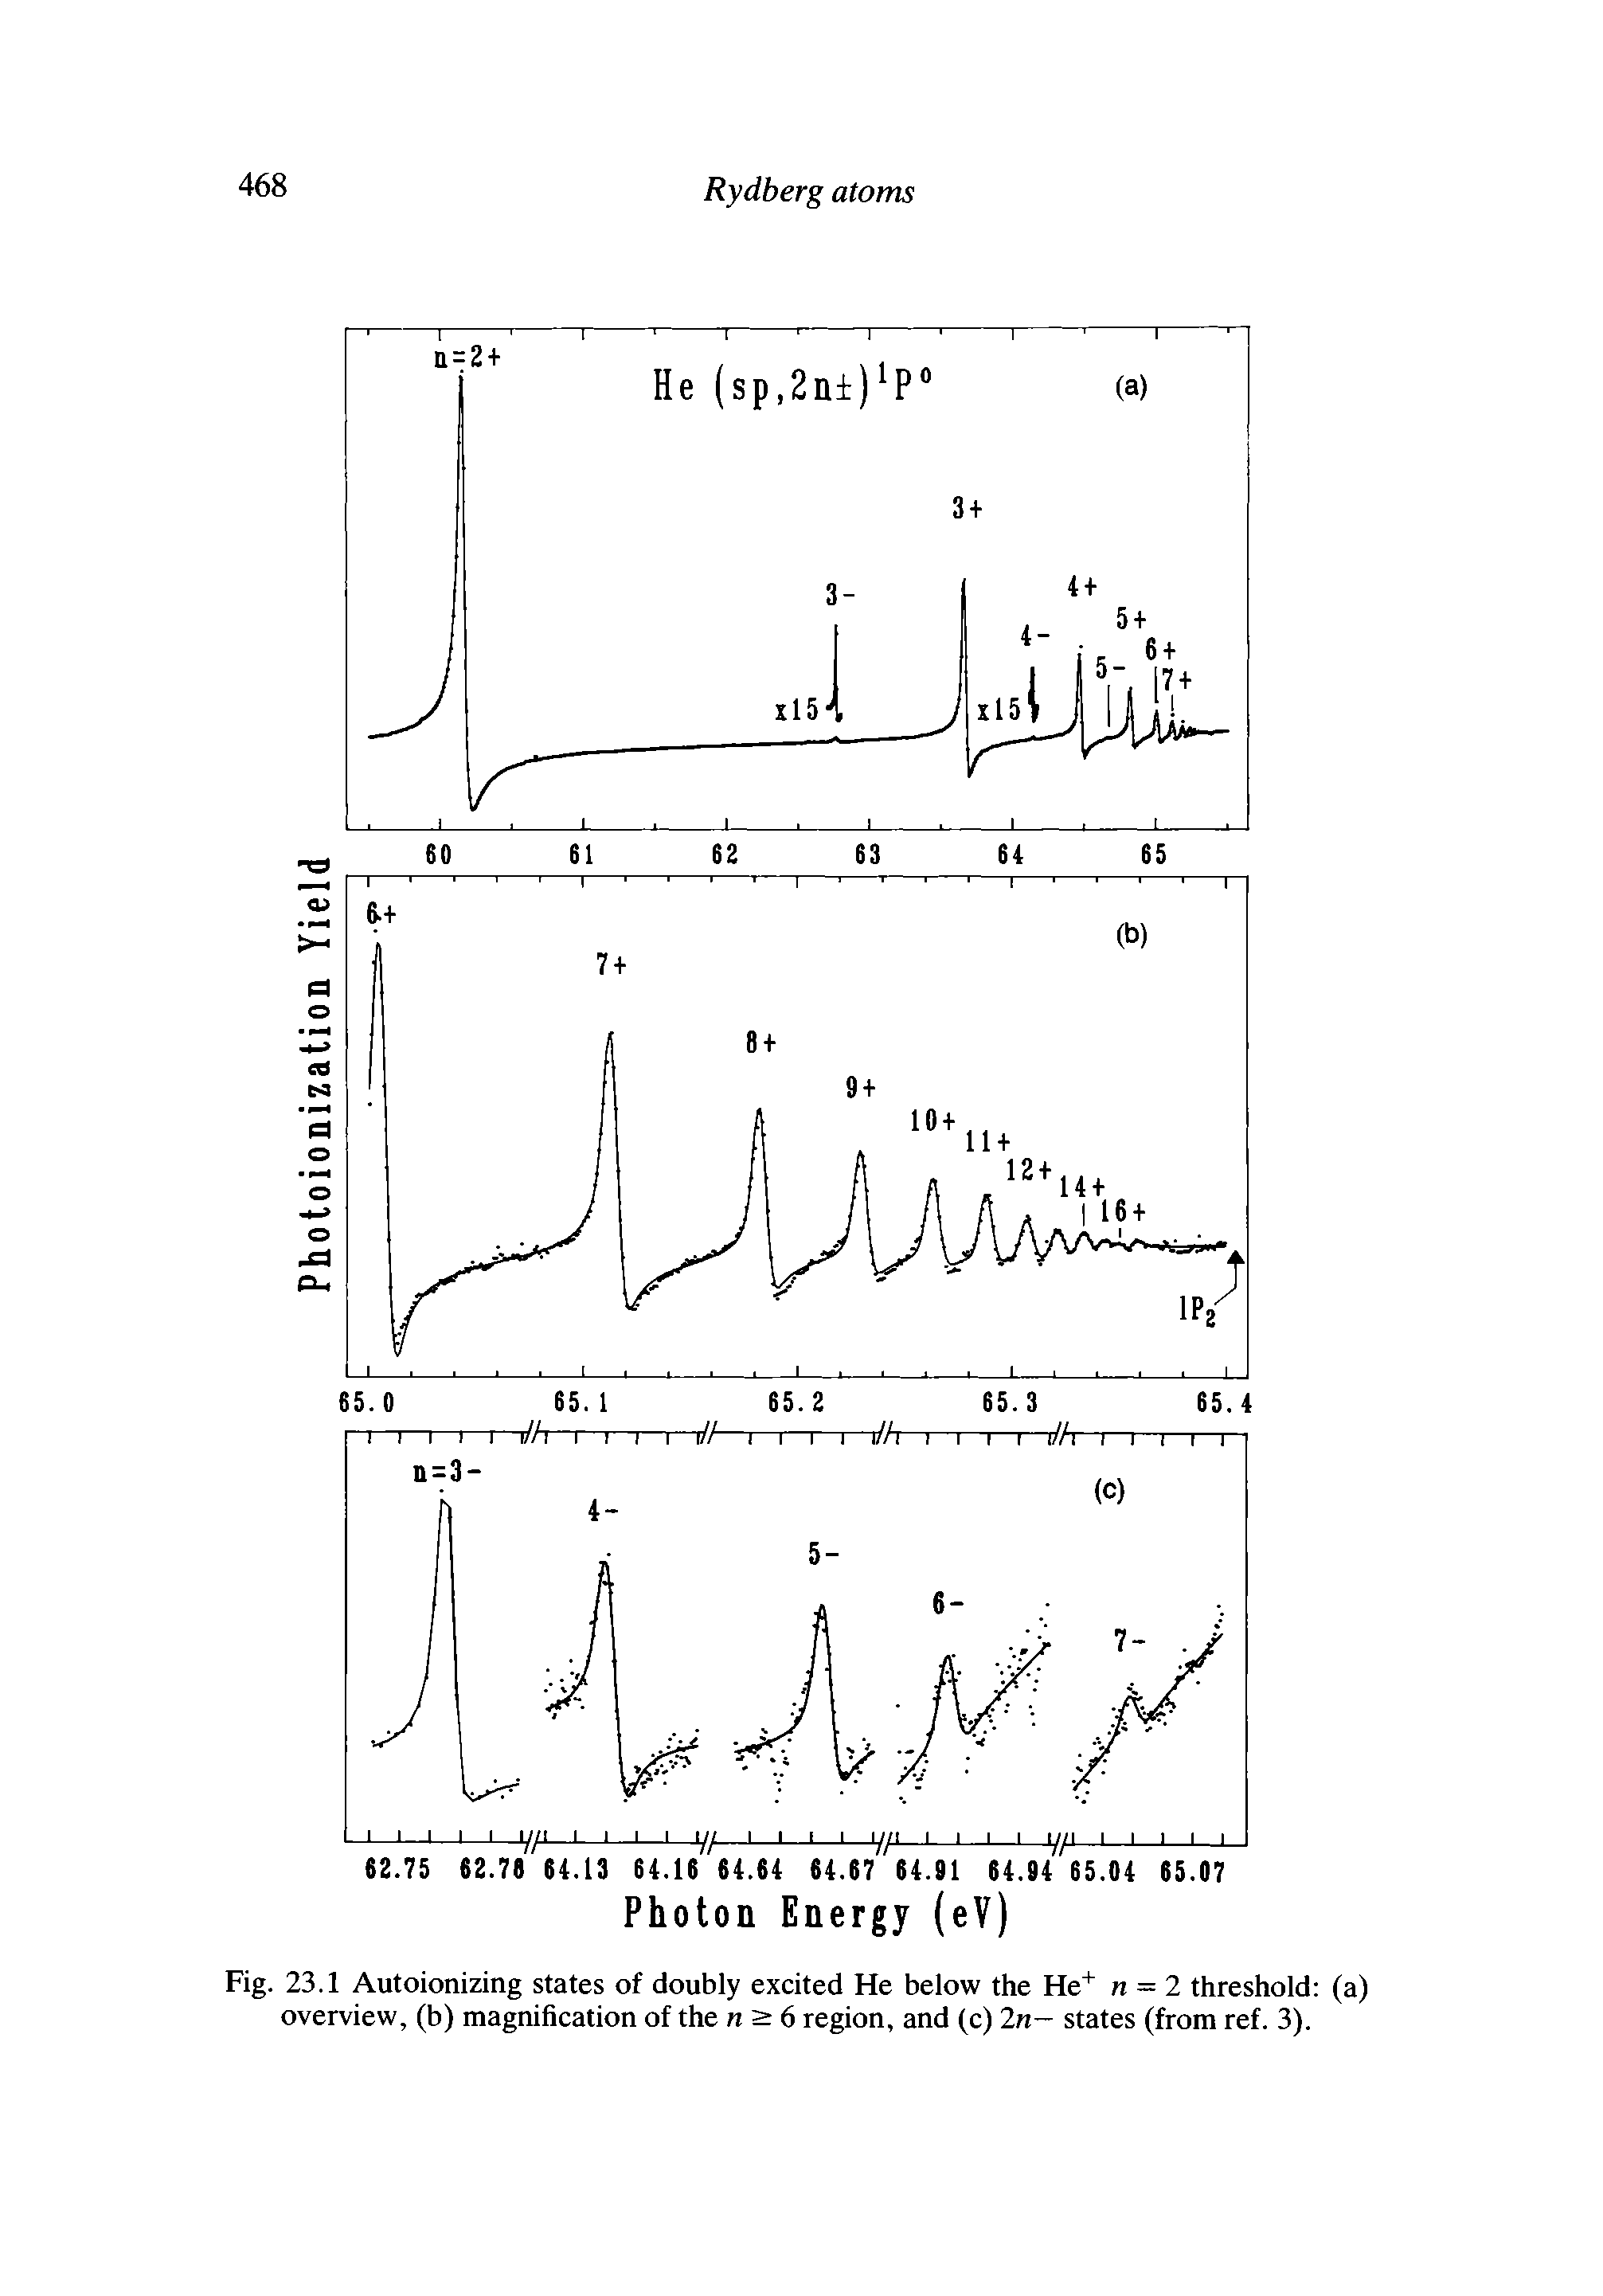 Fig. 23.1 Autoionizing states of doubly excited He below the He+ n = 2 threshold (a) overview, (b) magnification of the n > 6 region, and (c) 2n- states (from ref. 3).